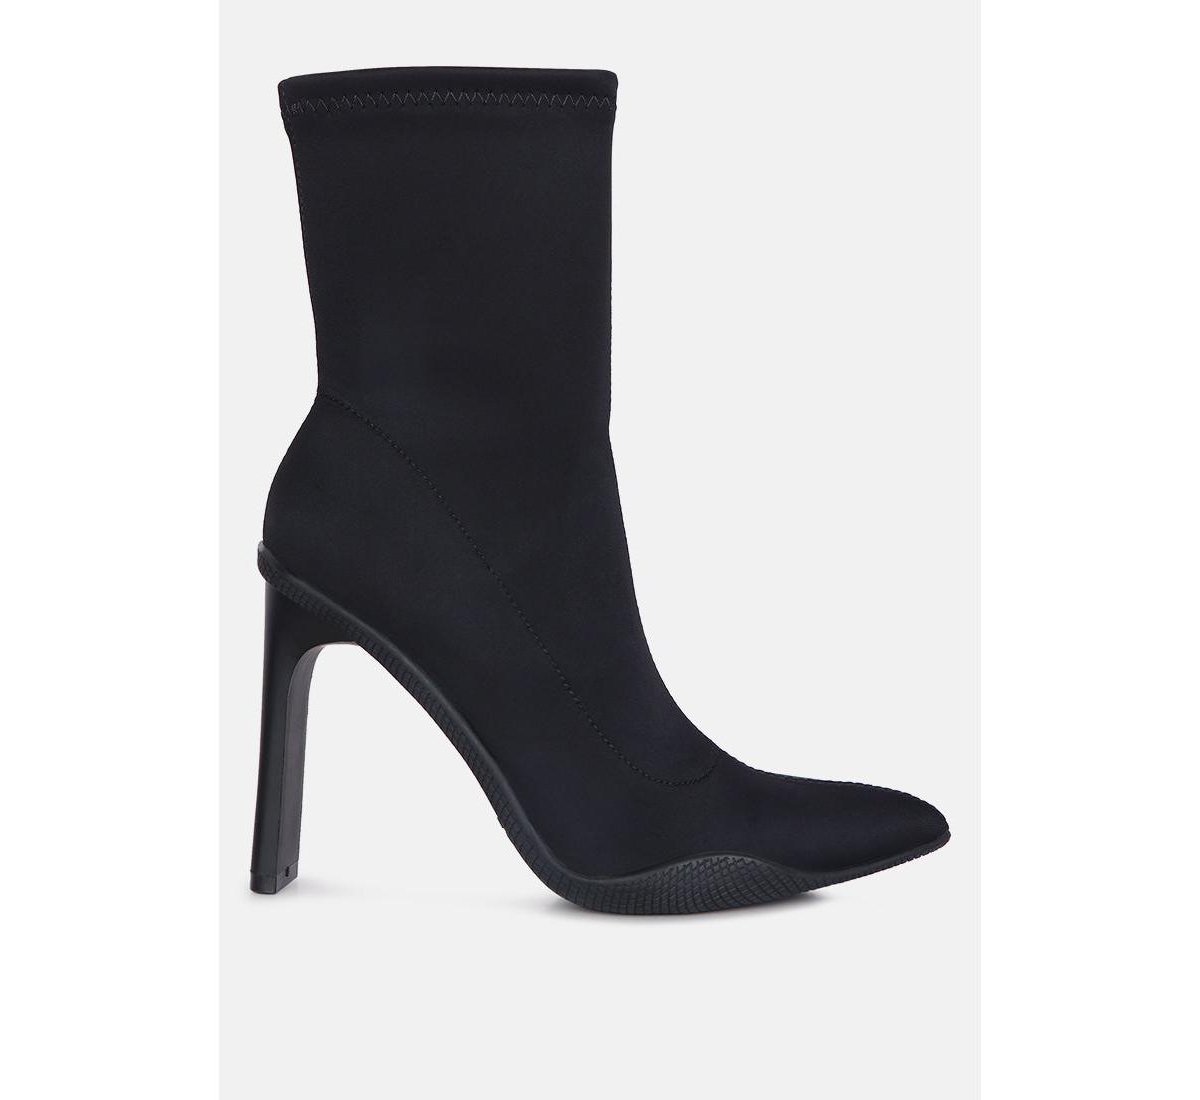 tokens pointed heel ankle boots - Black